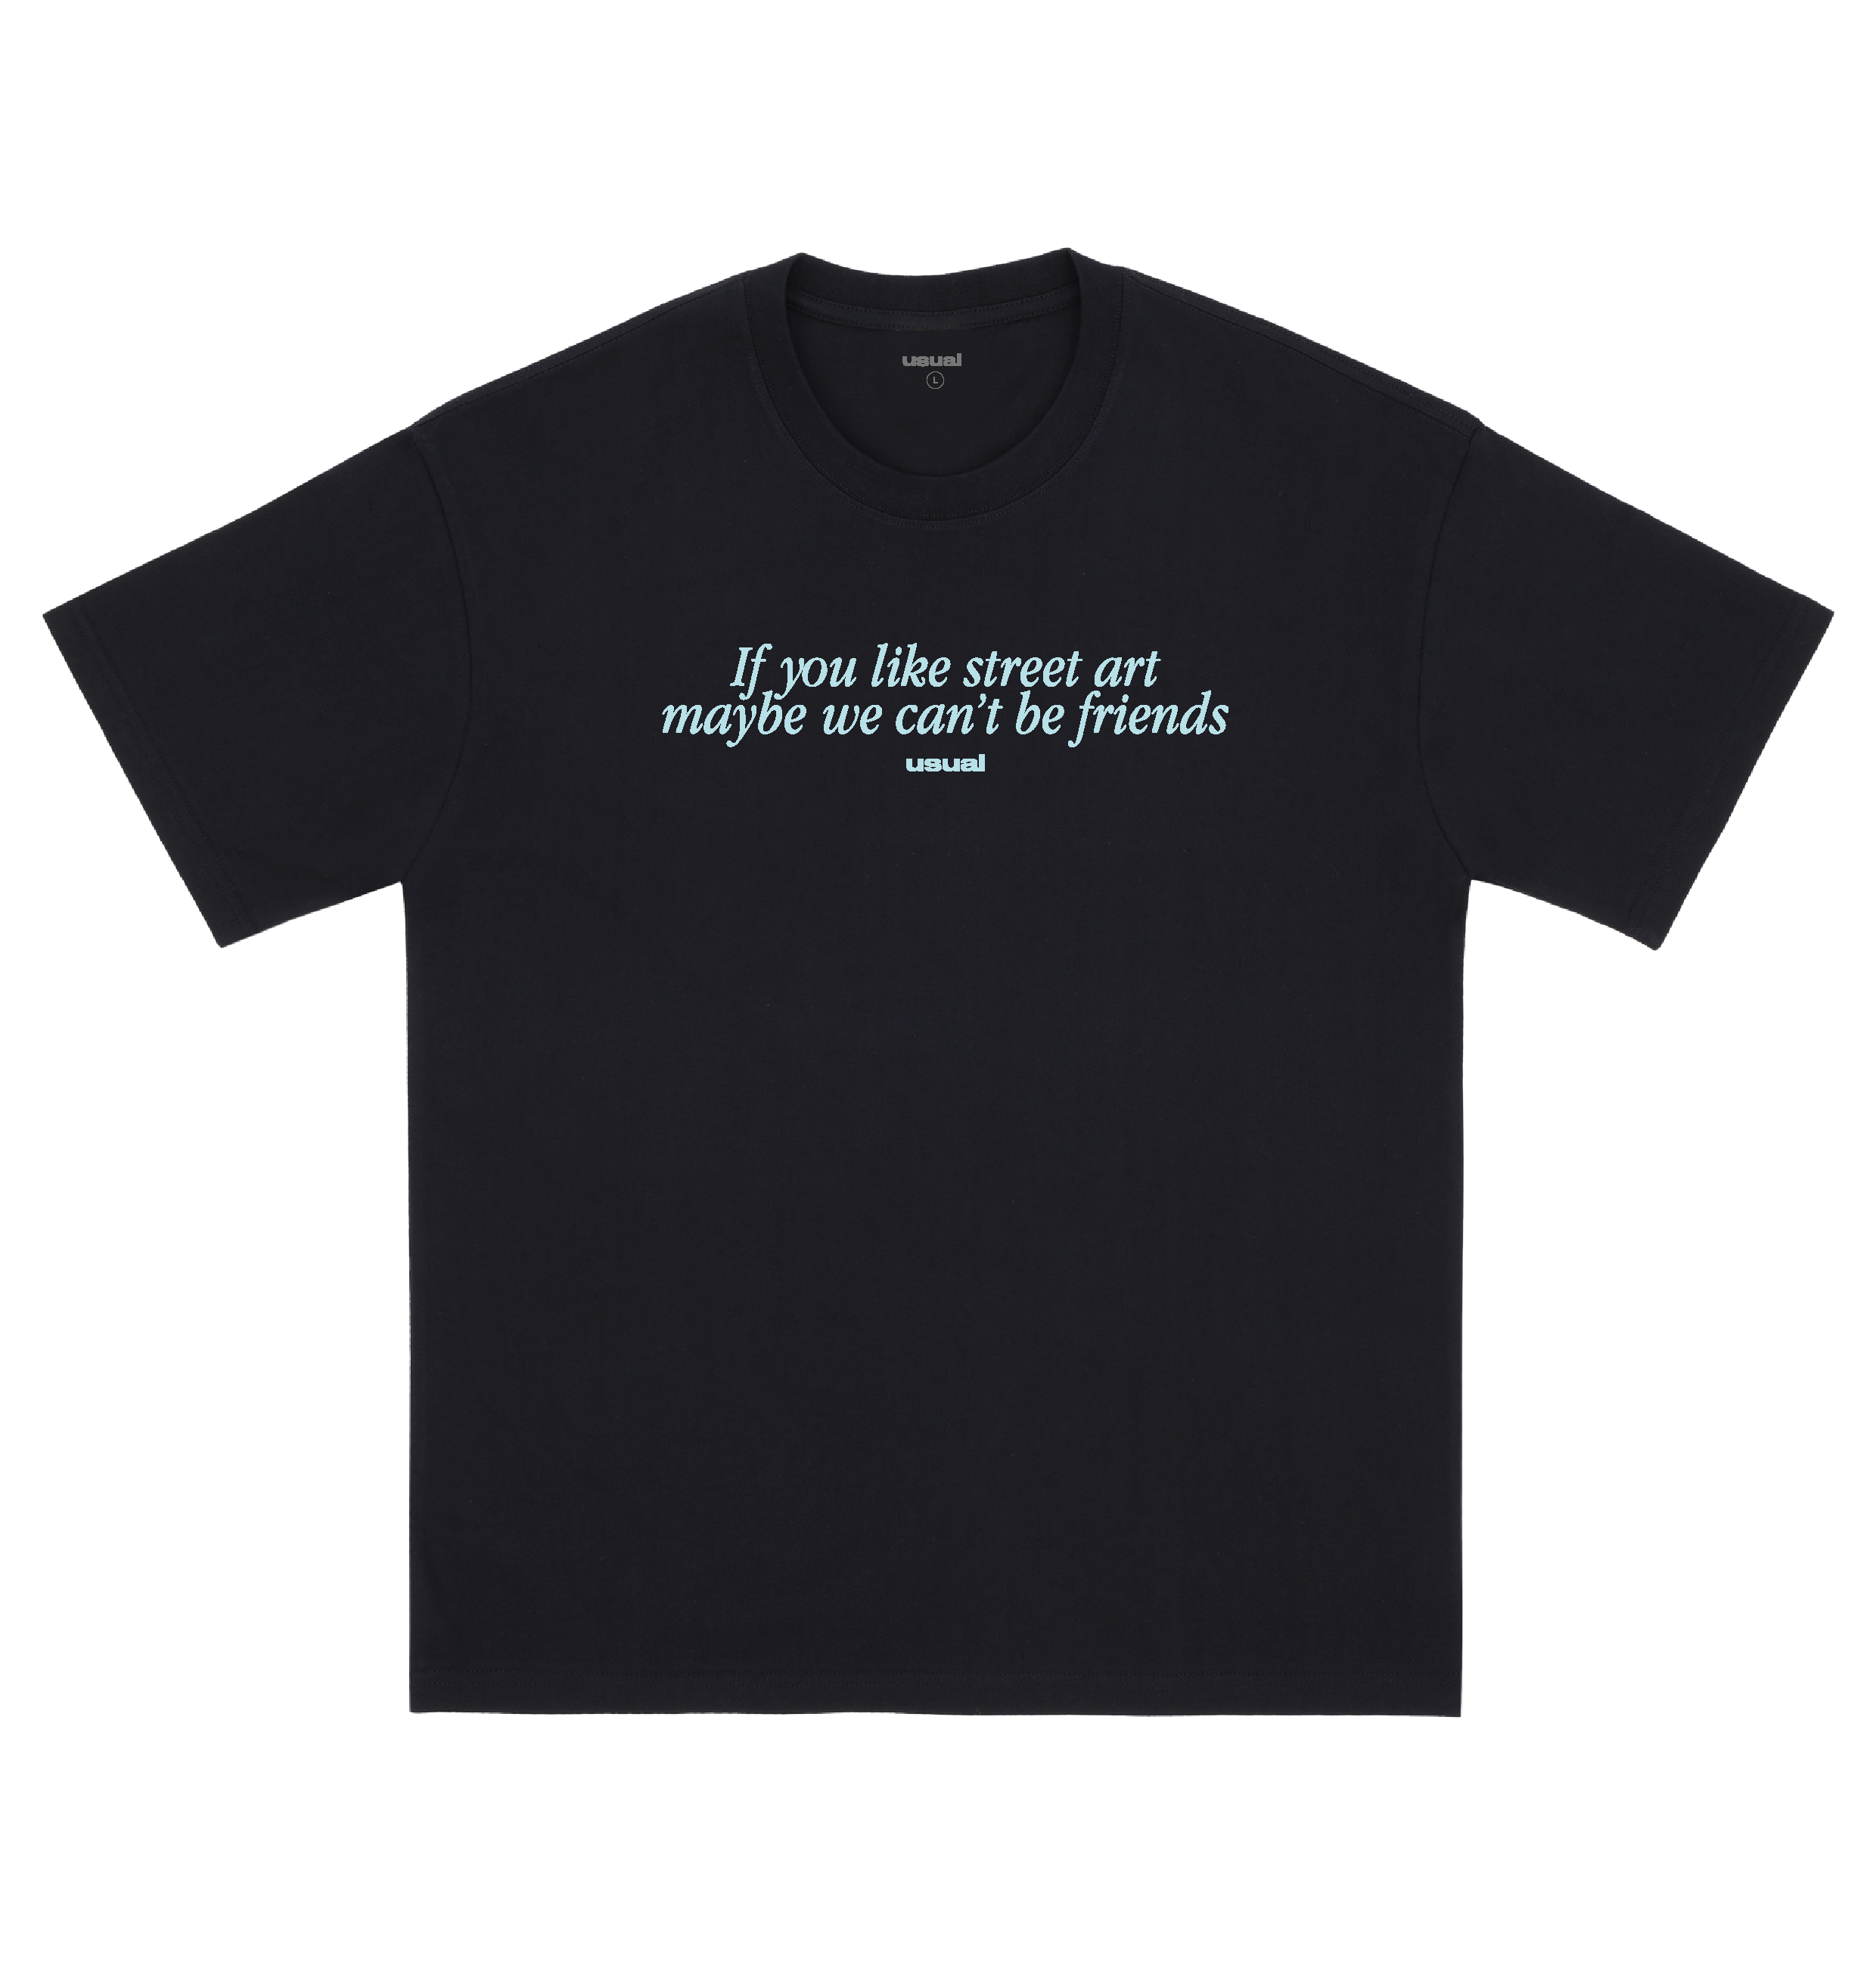 Can't be friends t-shirt